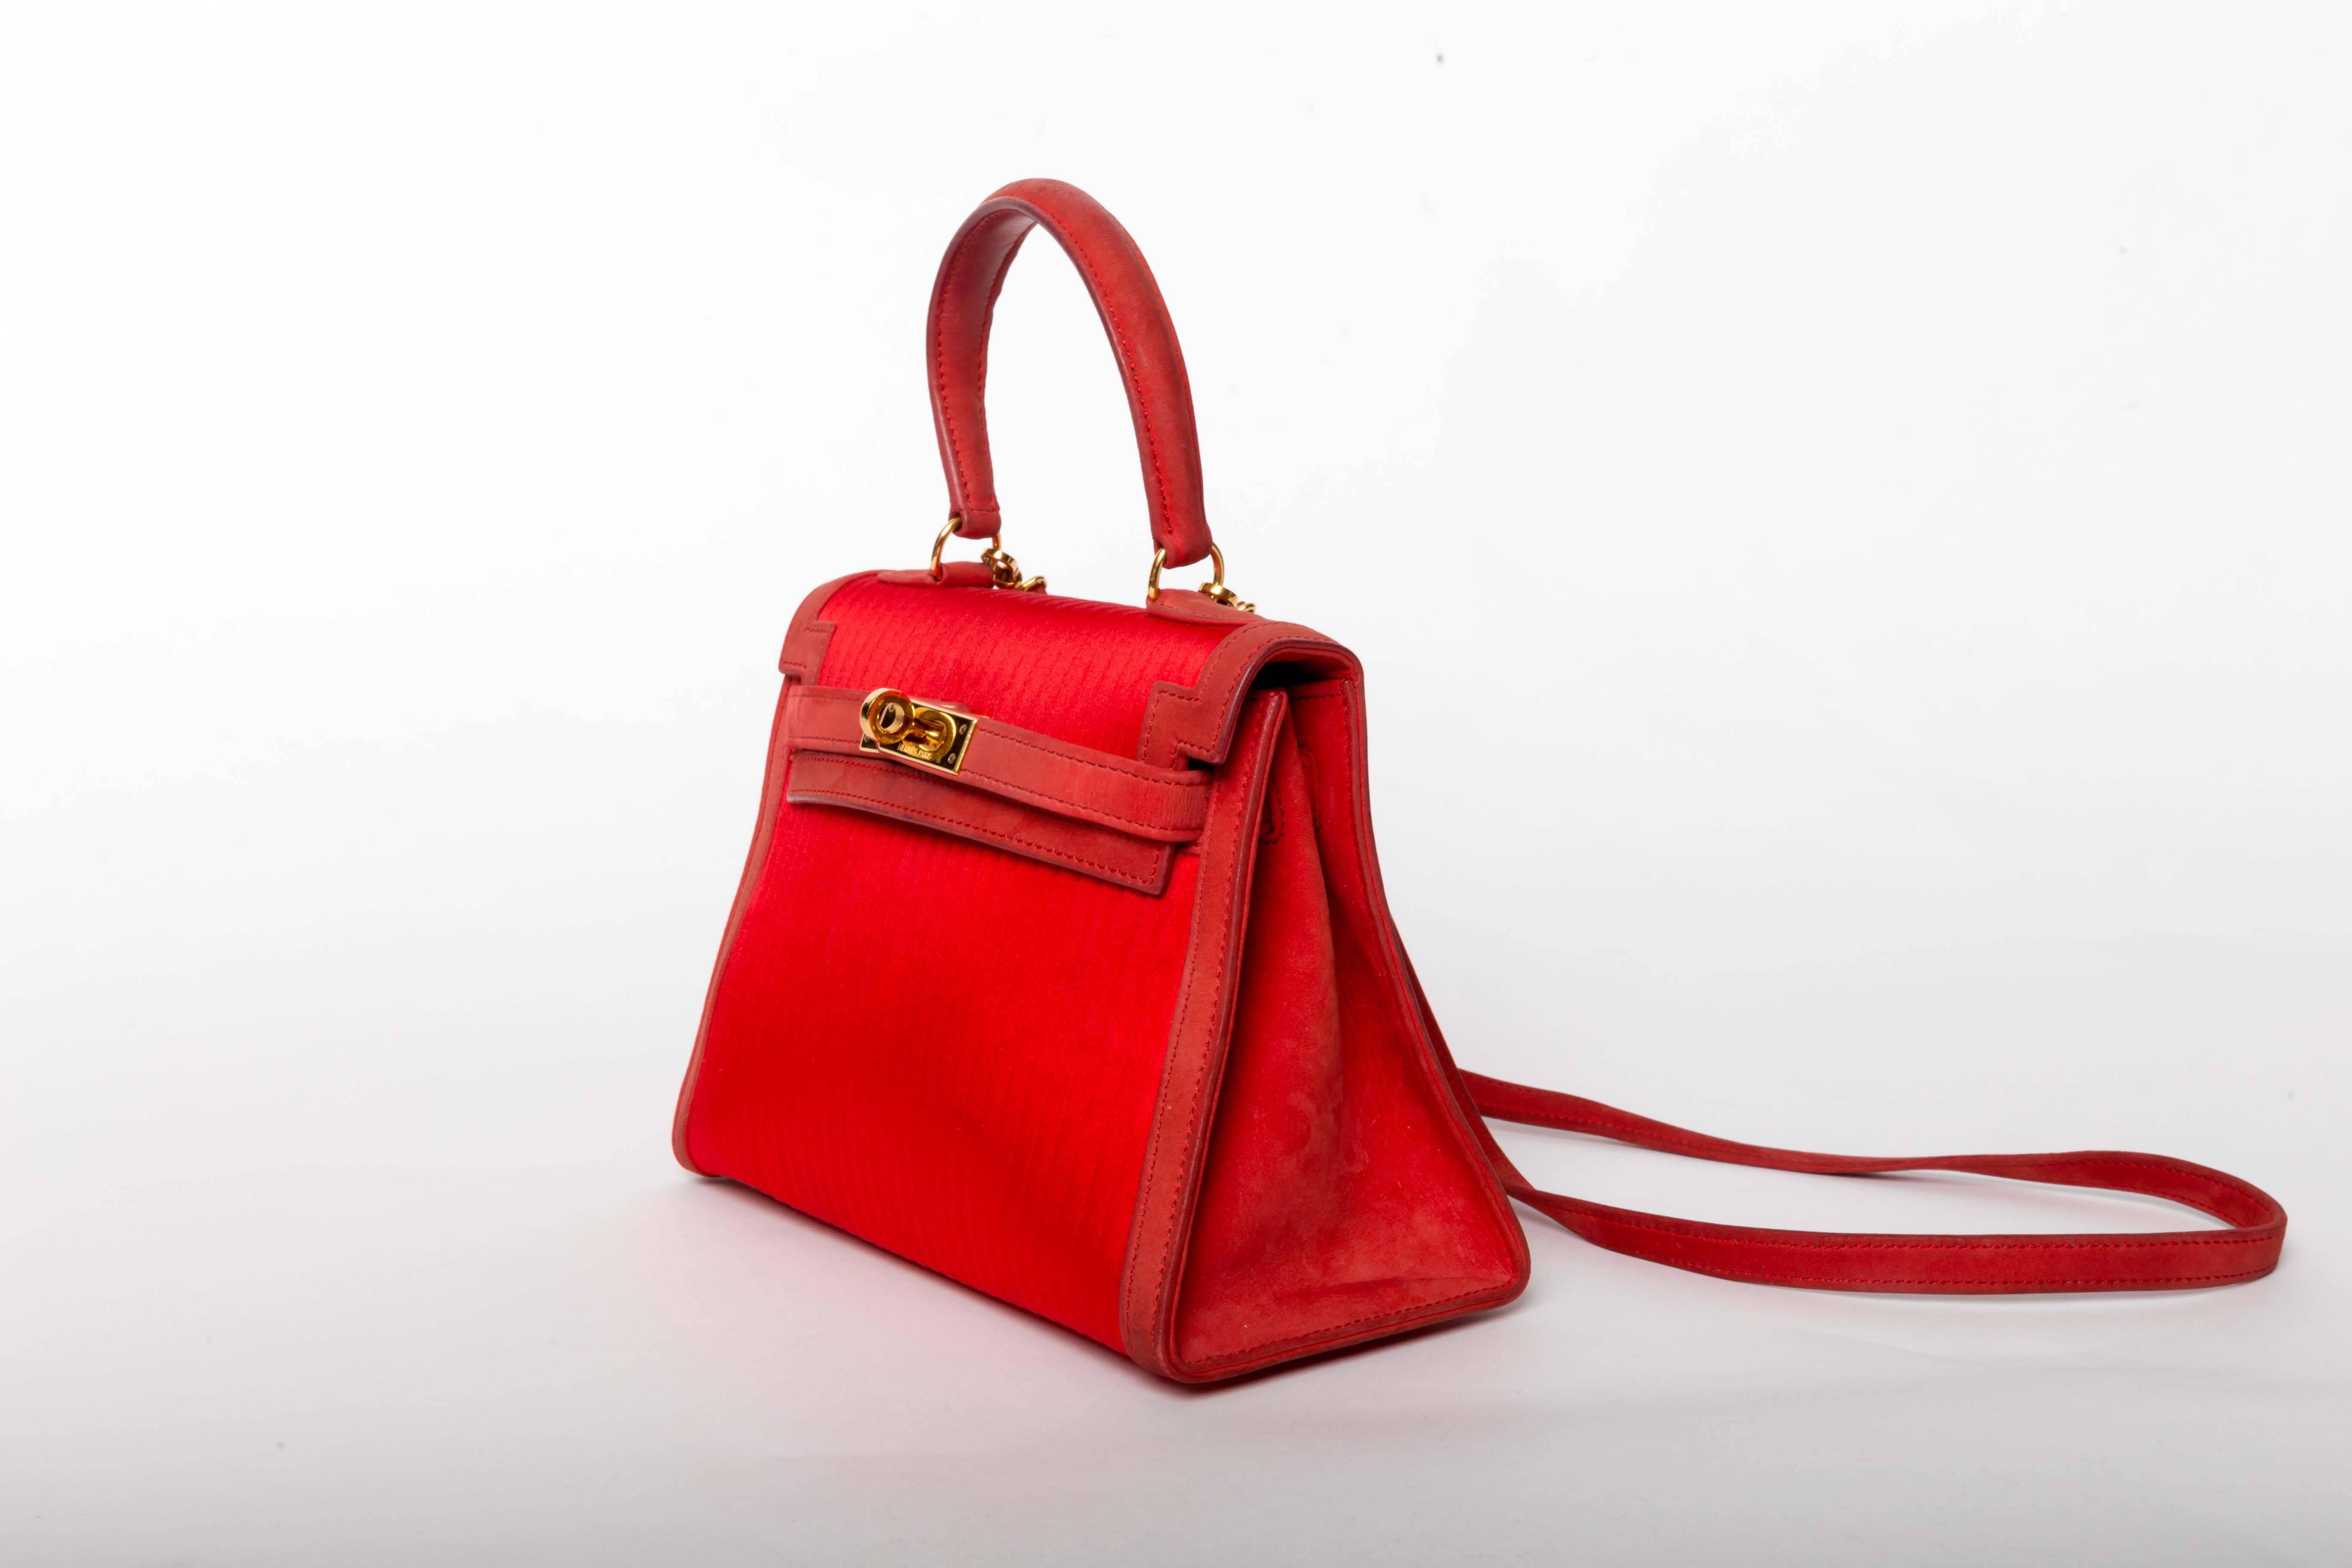 Exceptionally rare vintage Hermes  20cm mini Kelly bag in red satin and suede nubuck with gold hardware and detachable shoulder strap.  Limited edition / very rare bag in good to very good condition. A trip to the spa would rejuvenate this stunning